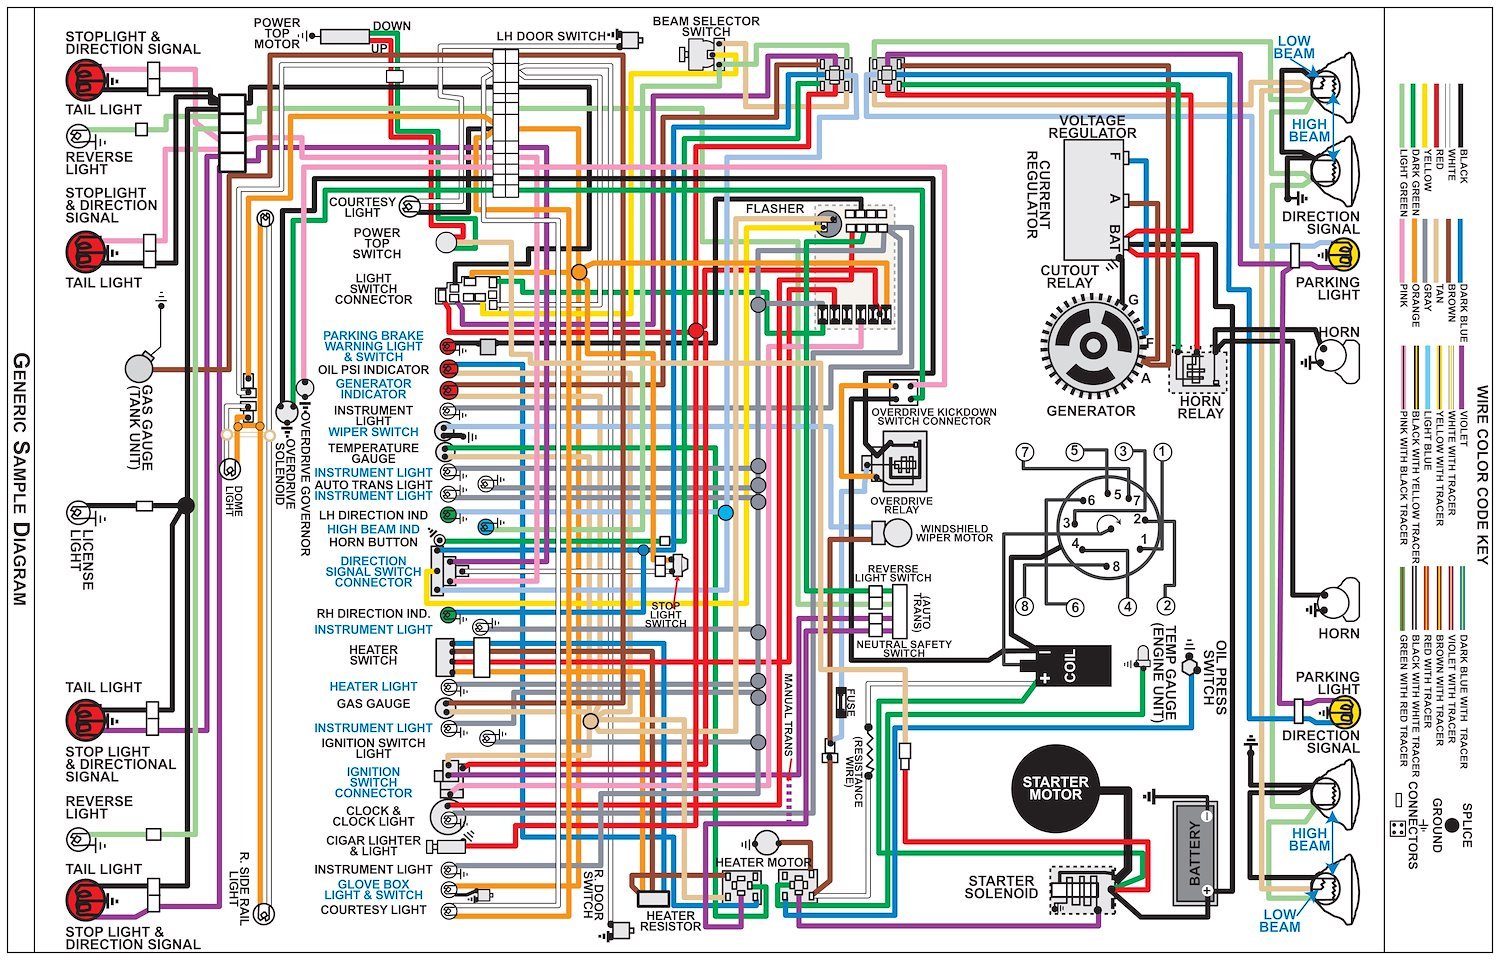 Wiring Diagram for 1970 Dodge Challenger with Rallye